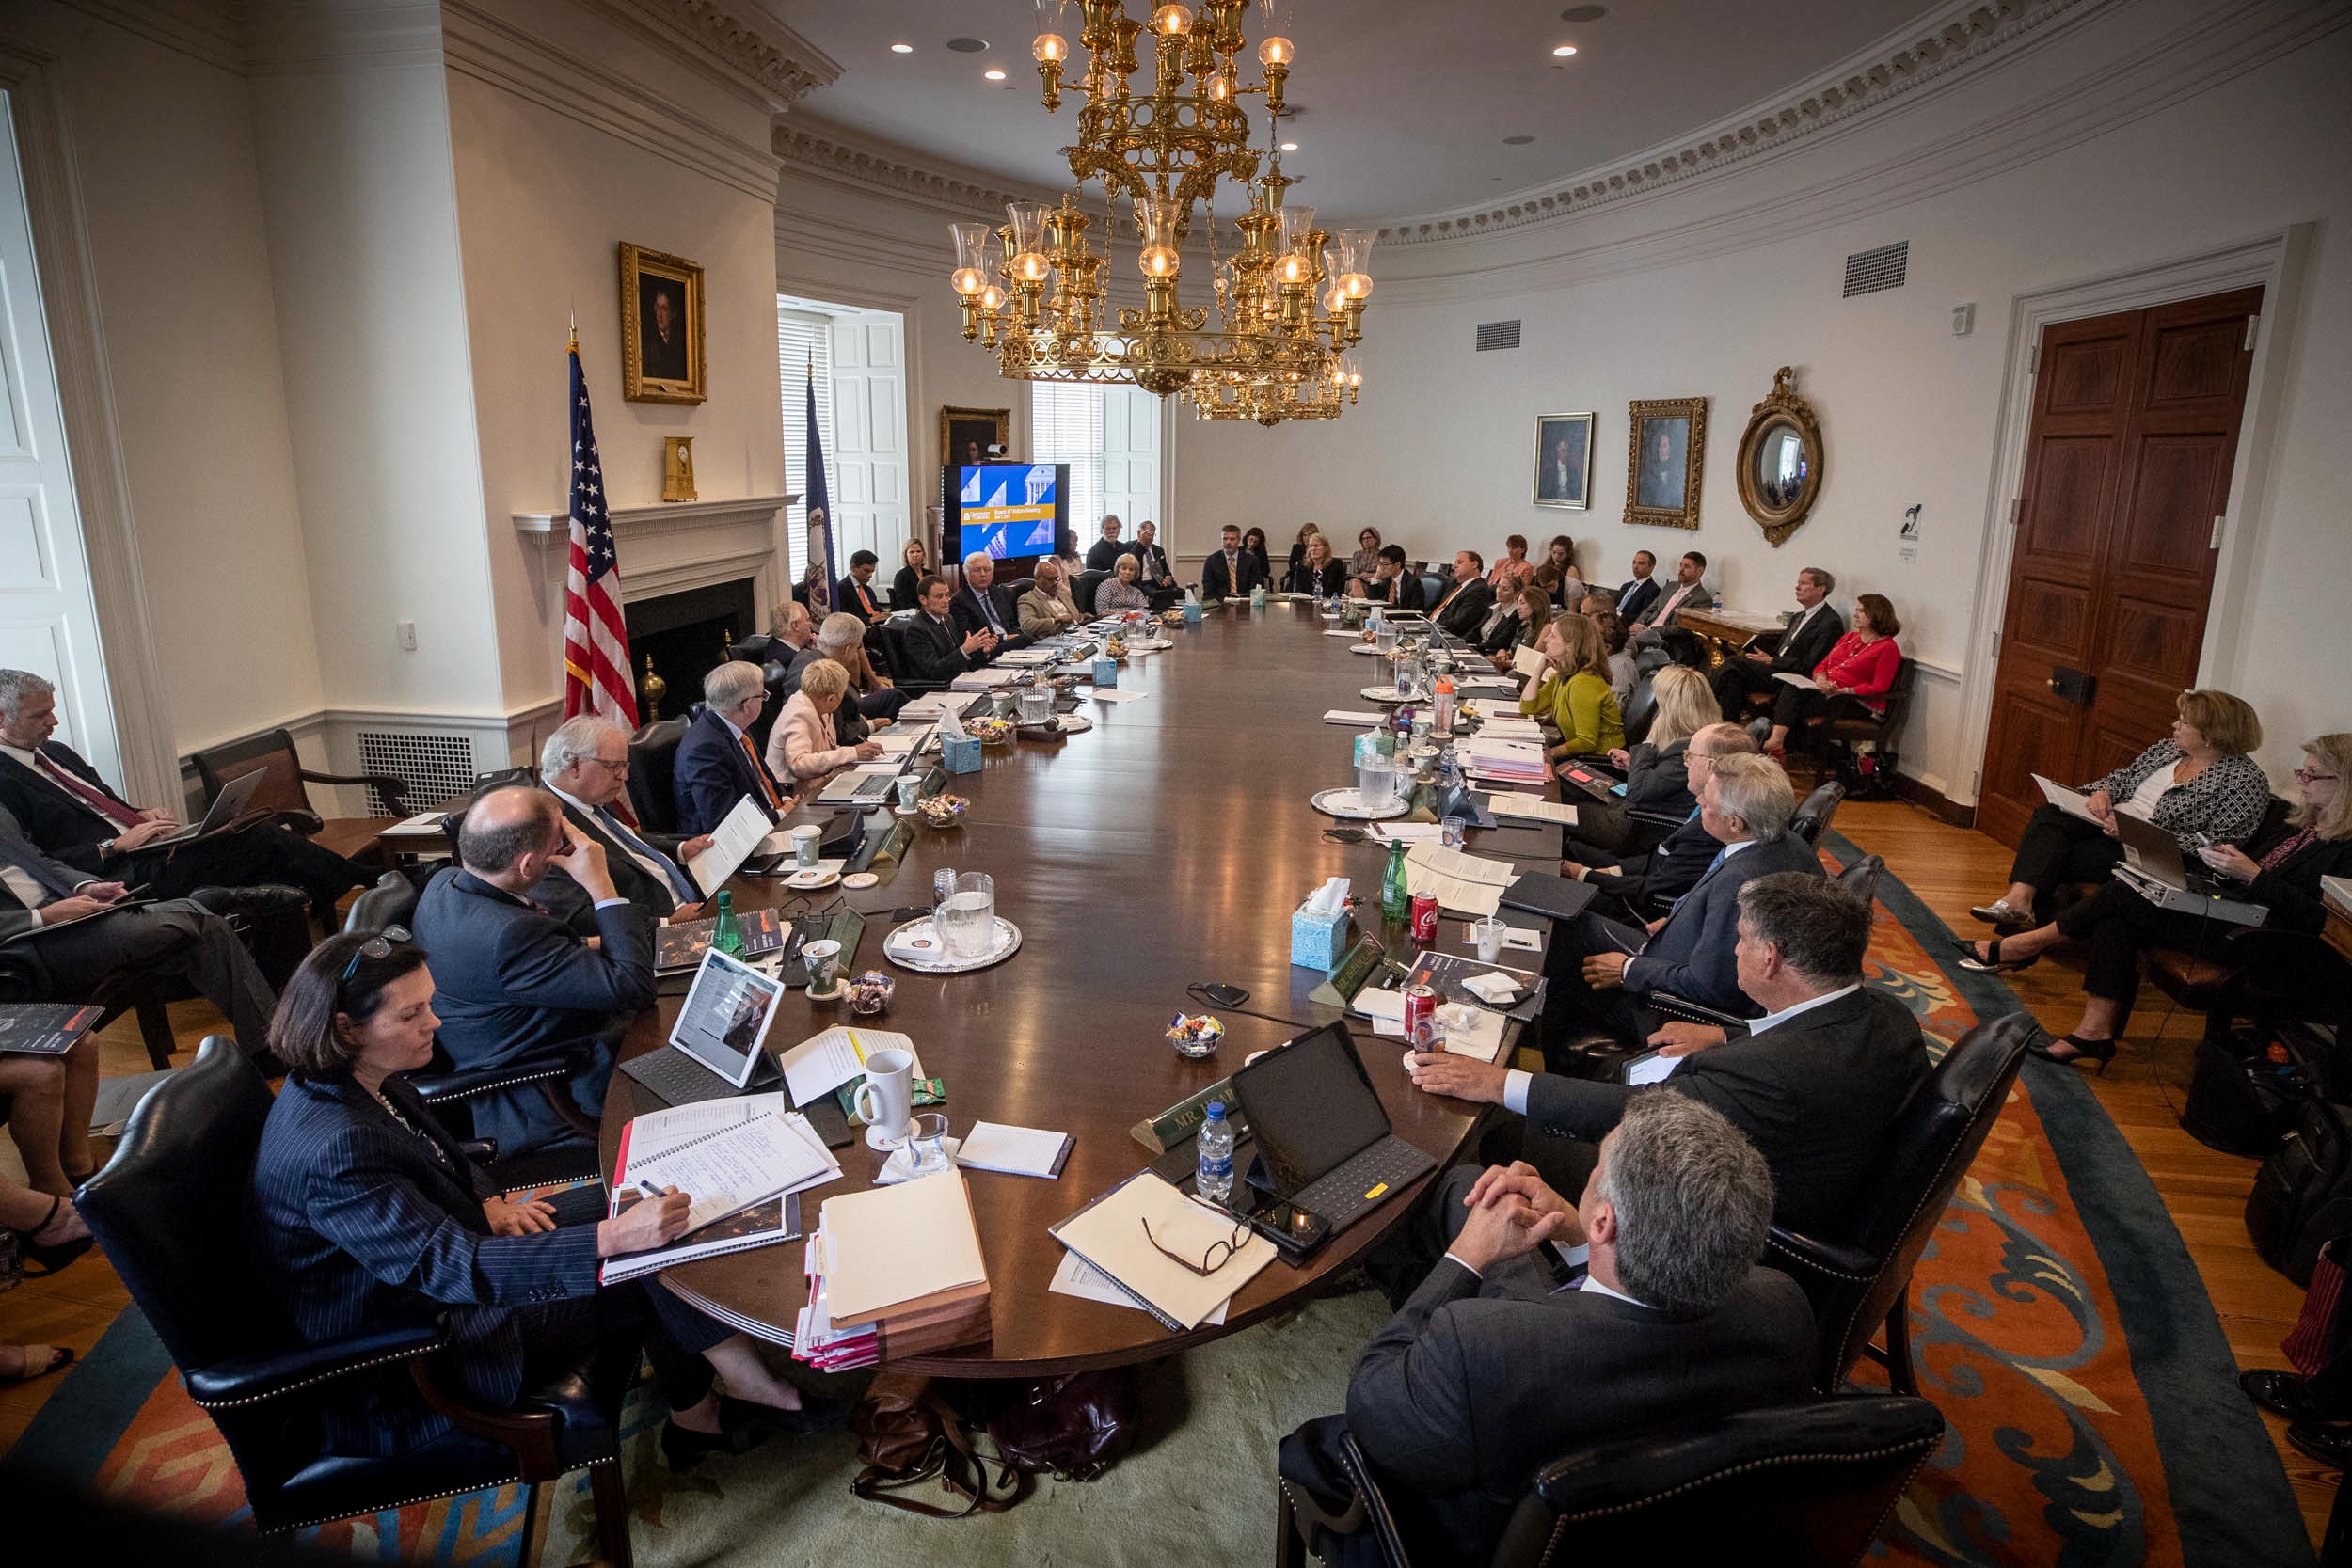 Board of Visitors sit at an oval table watching a presentation